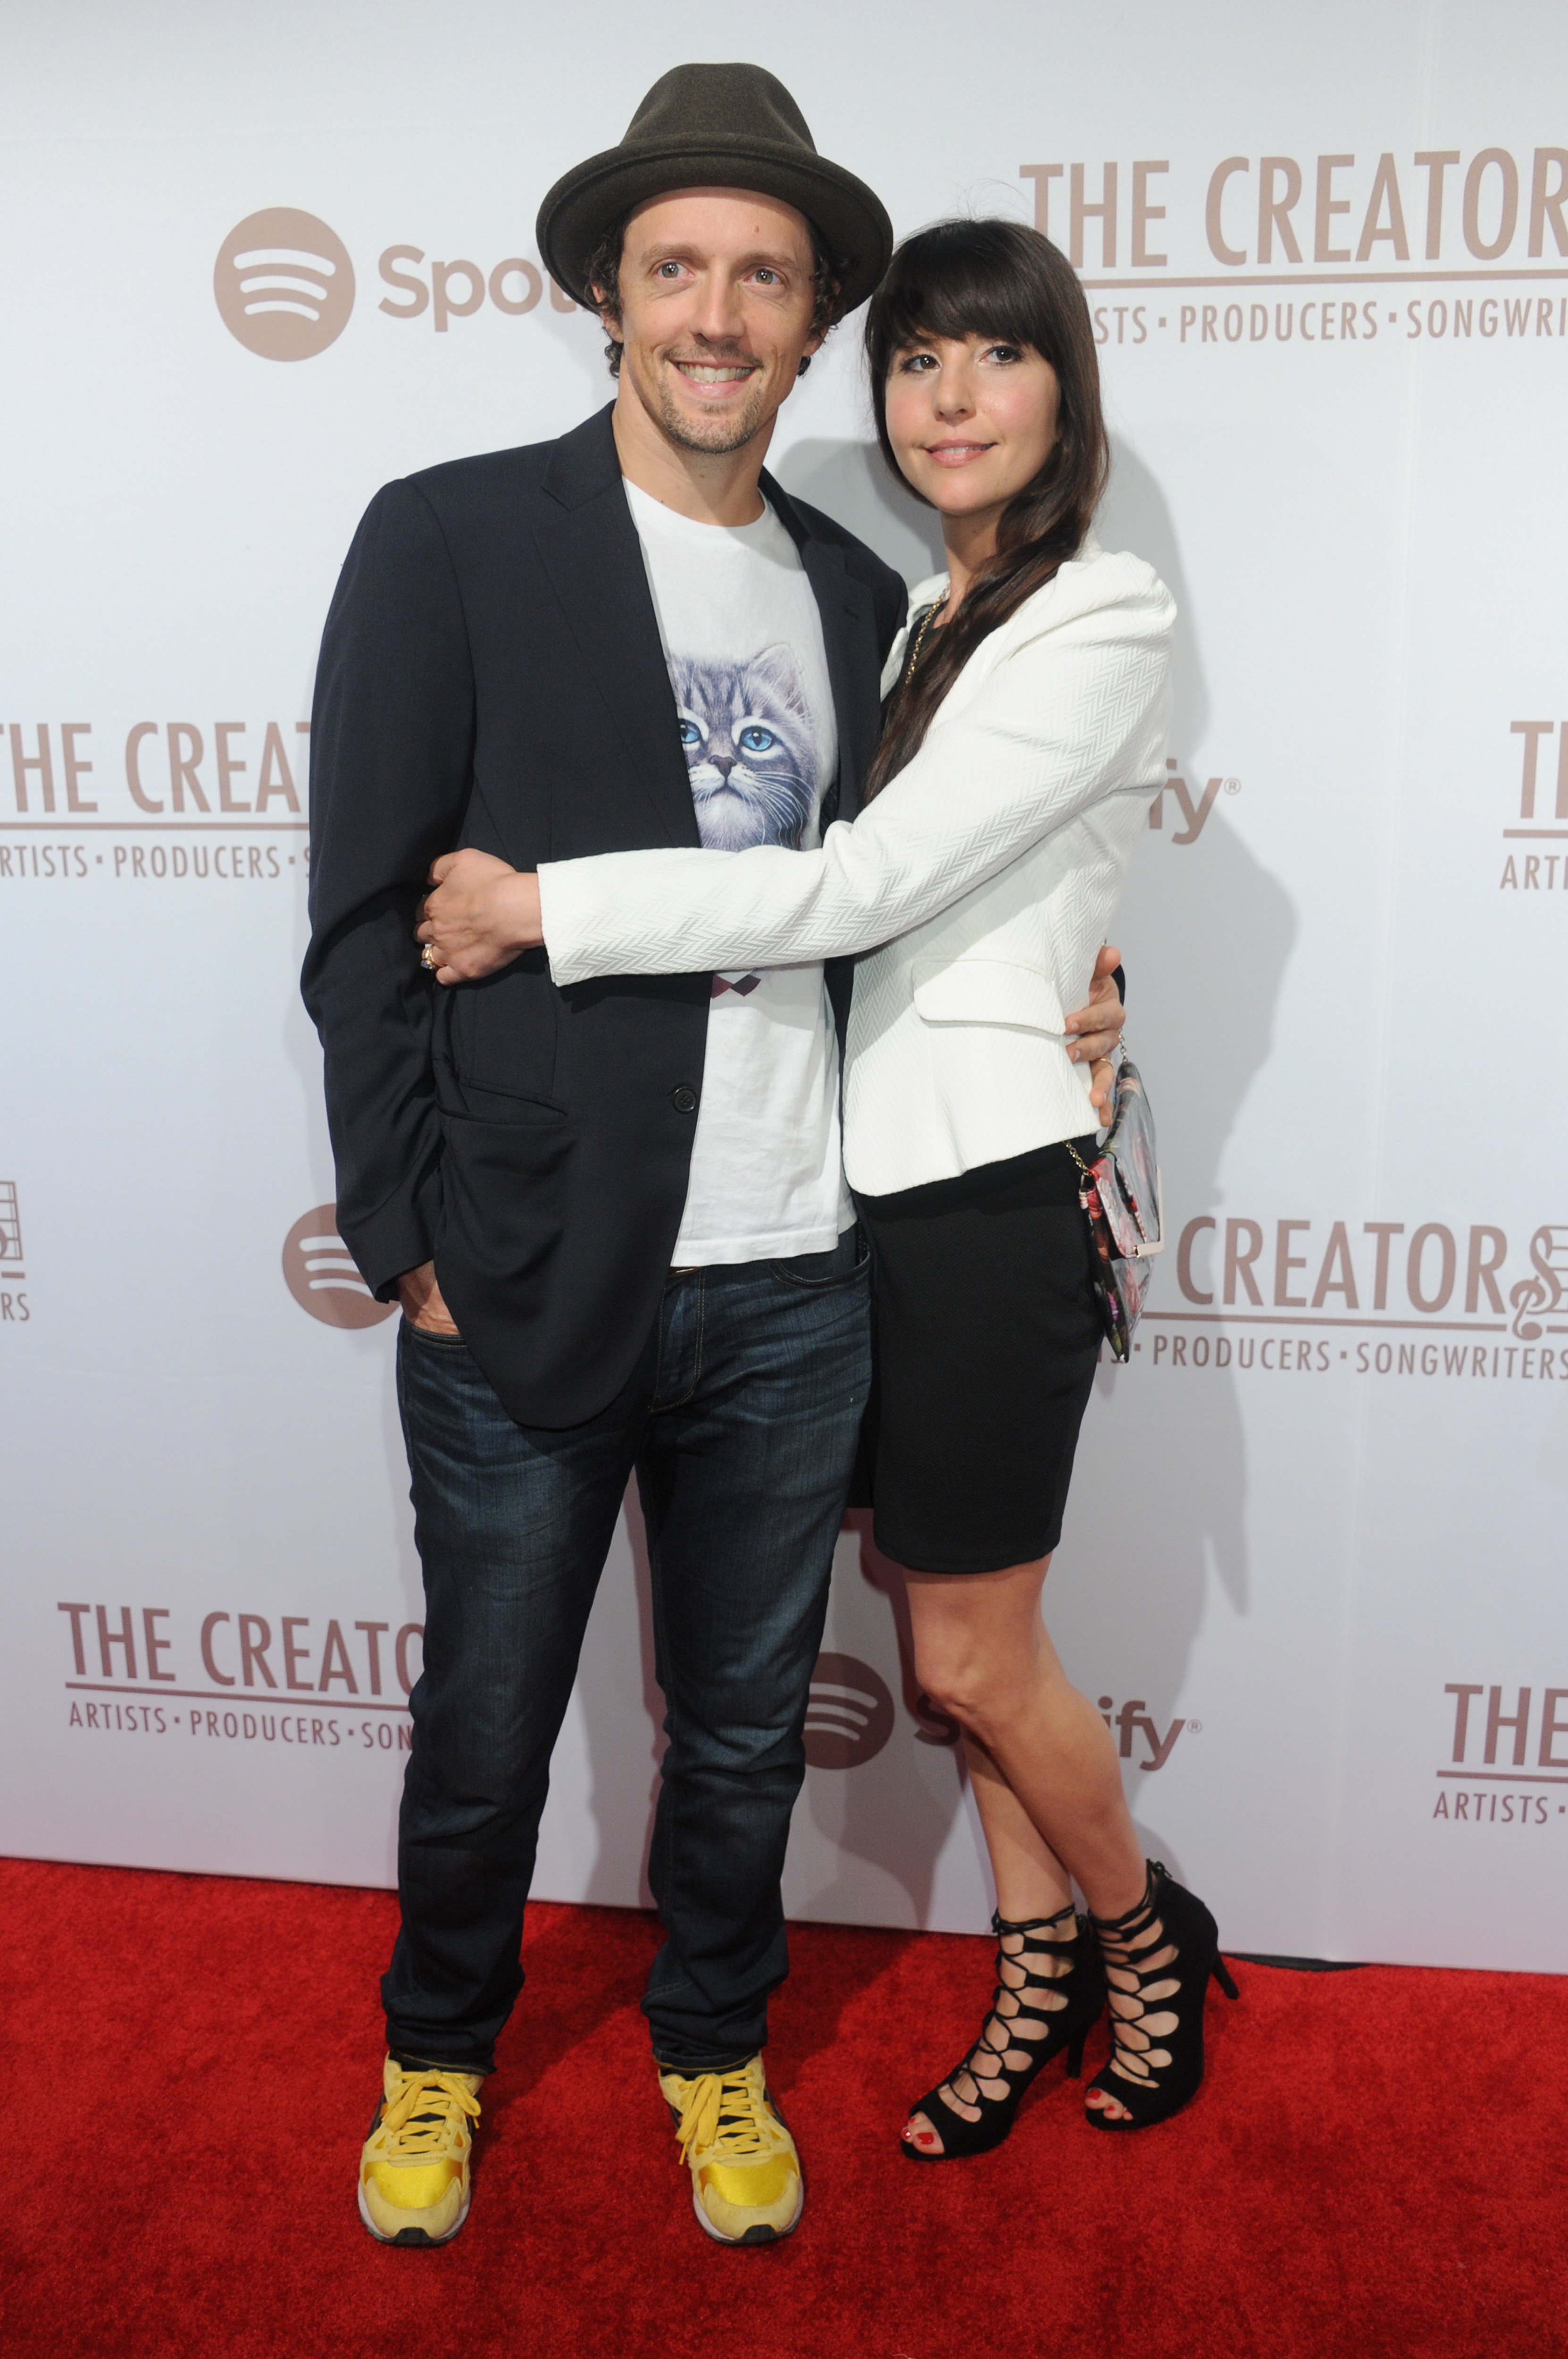 Jason Mraz and Christina Carano at The Creators Party Presented by Spotify on February 13, 2016, in Los Angeles | Source: Getty Images